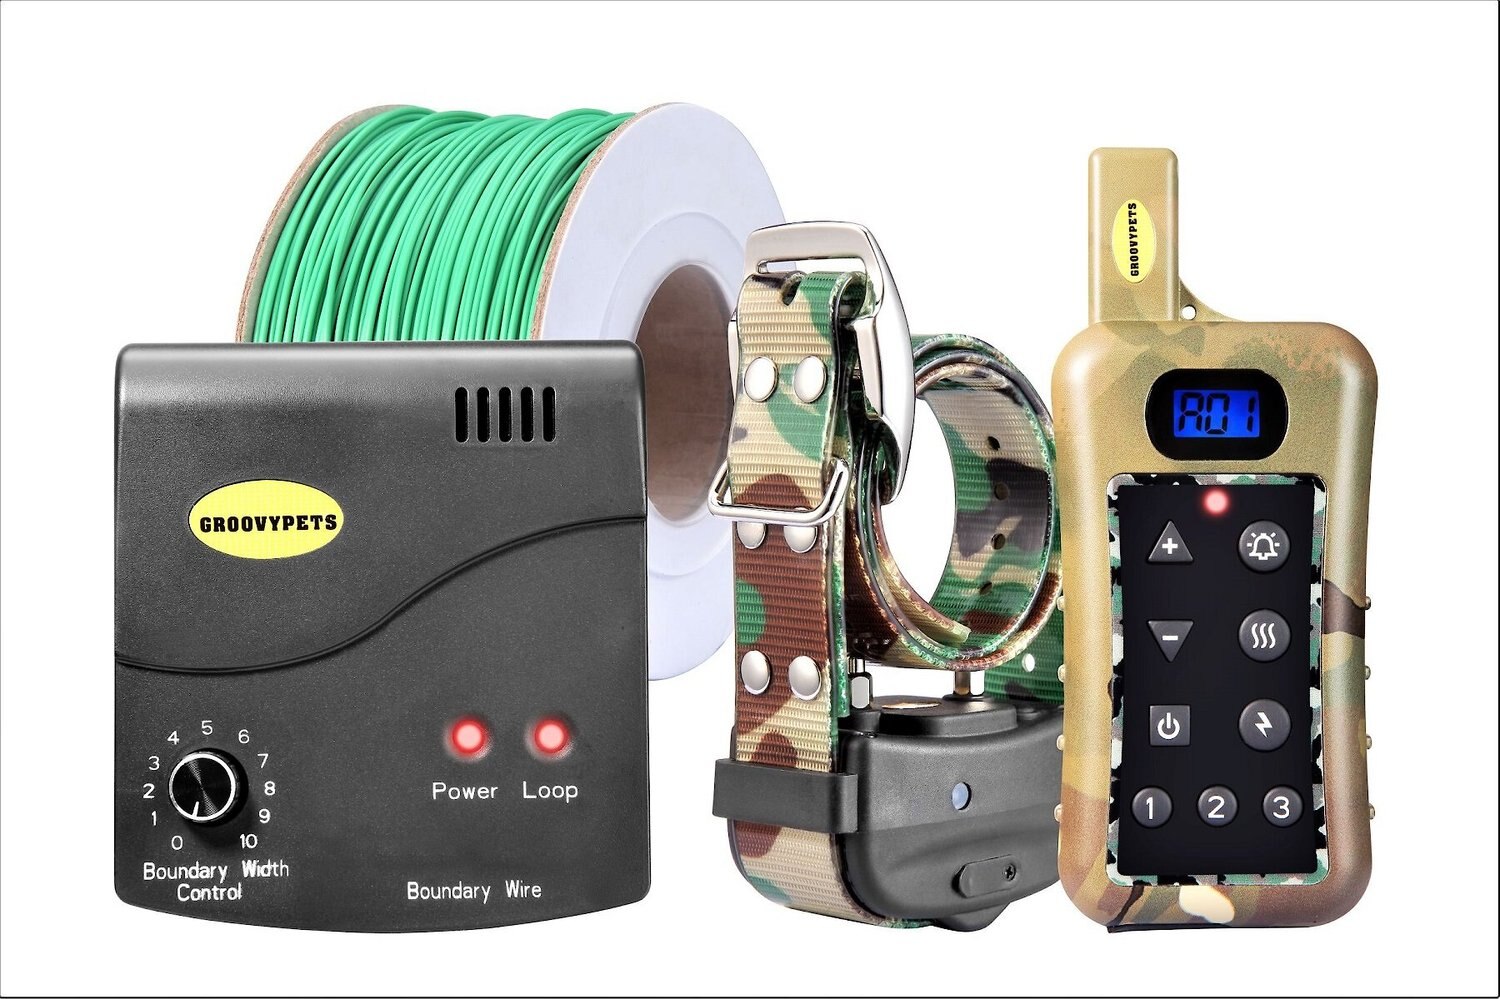 wireless dog fence with 3 collars